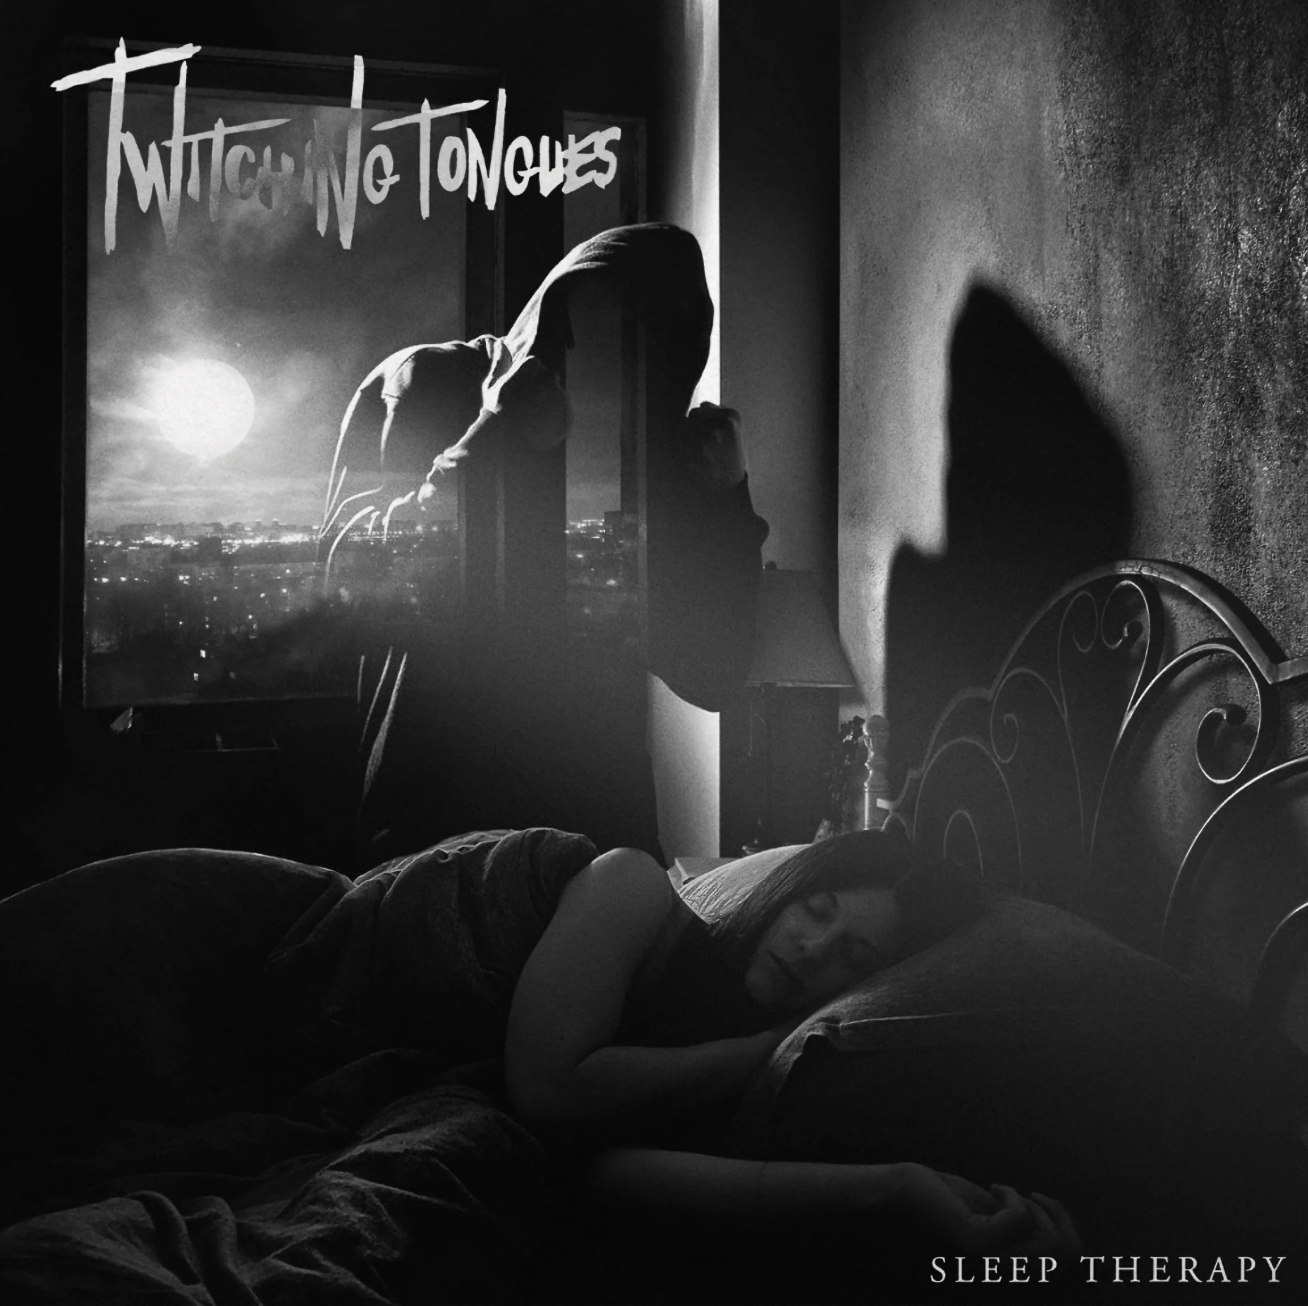 TWITCHING TONGUES - SLEEP THERAPY Vinyl 2xLP